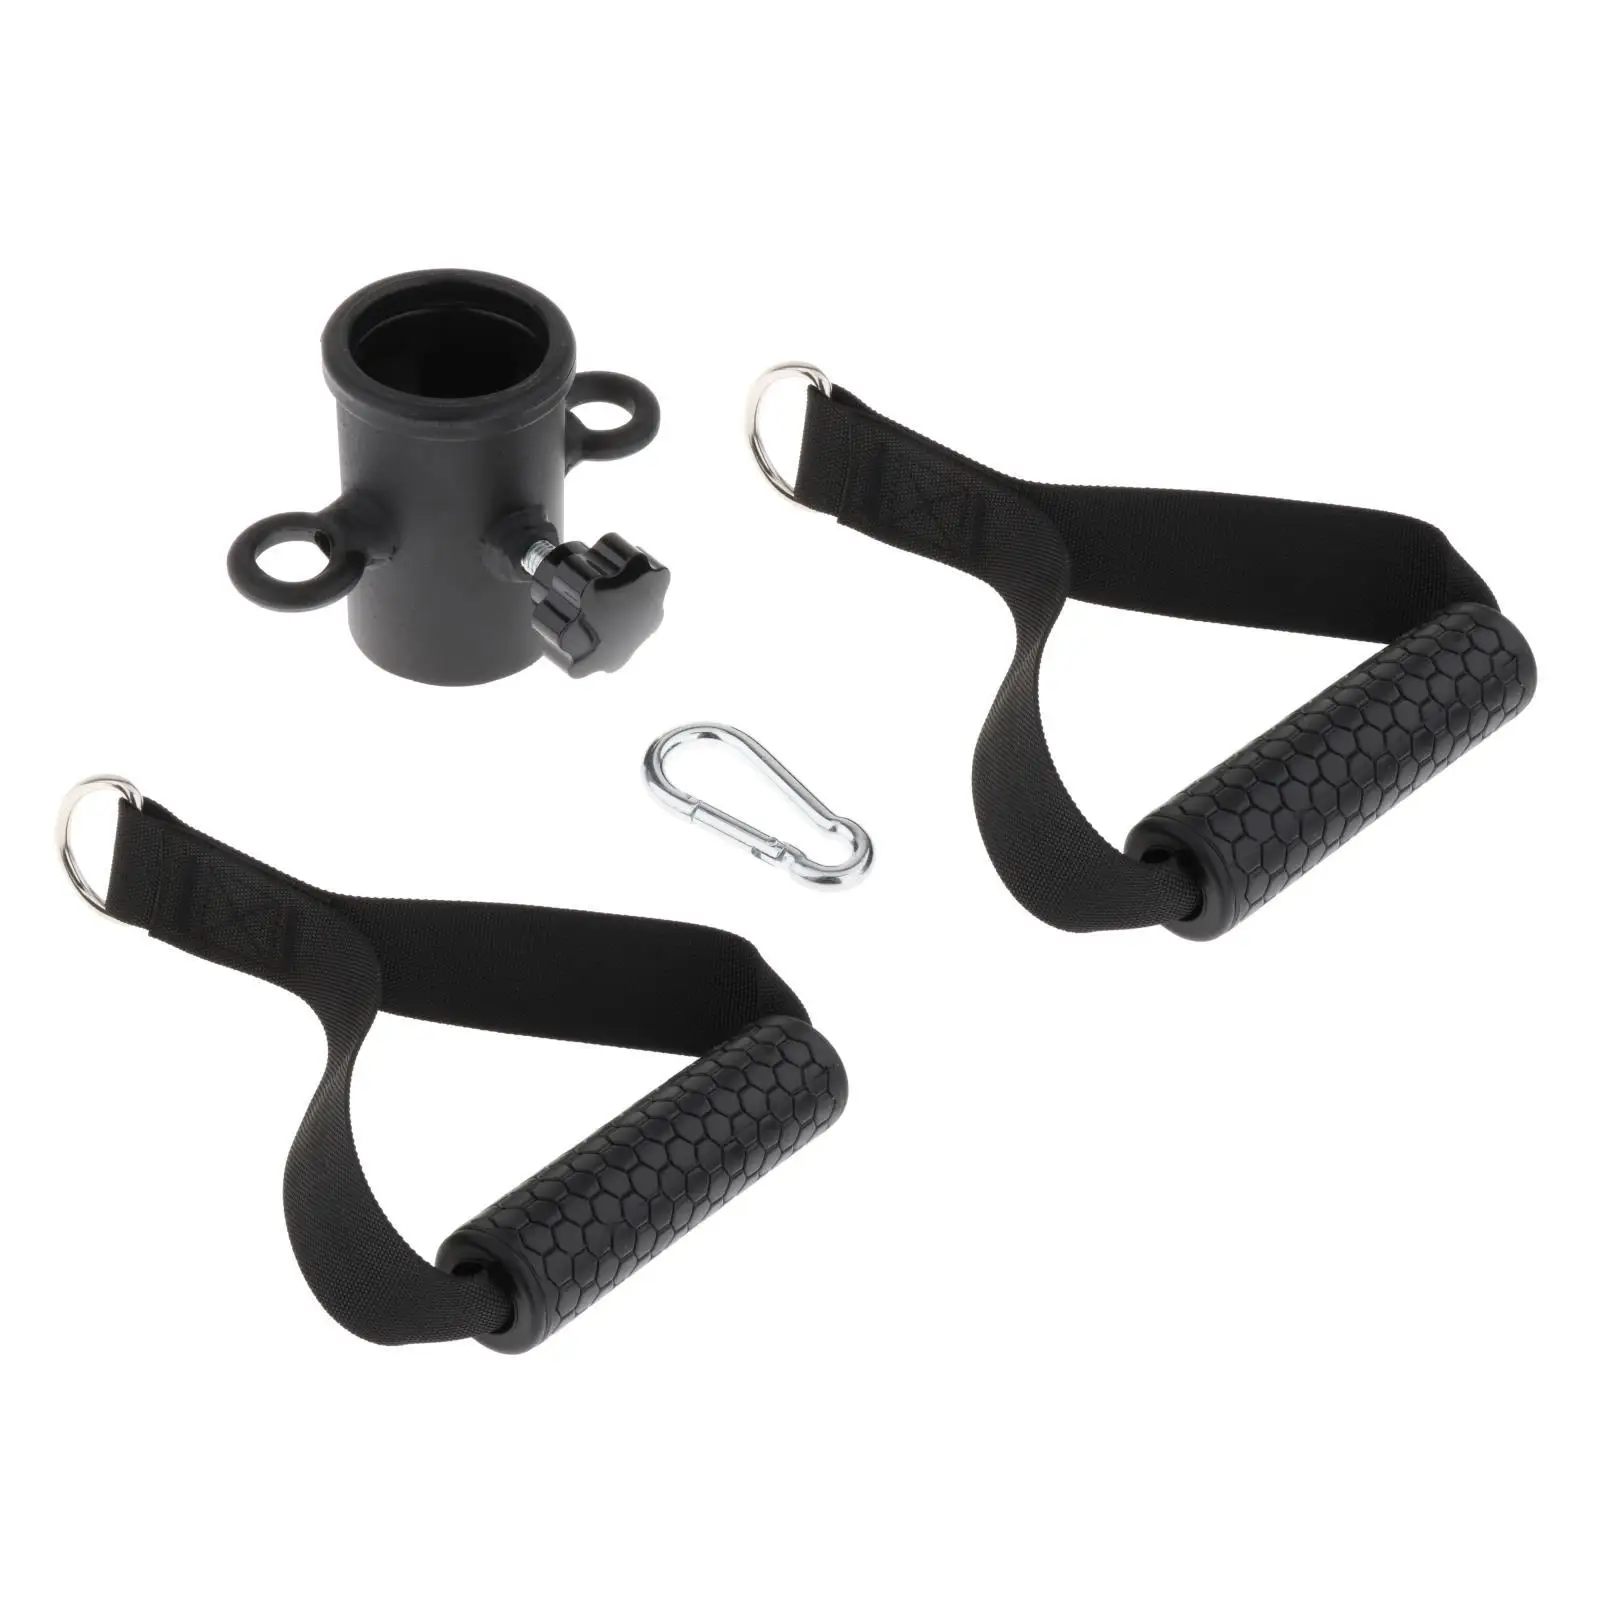 Landmine Handle Attachment Exercise Machine Parts Landmine Double Handle Grips for 50mm Bars for Weight Training Split Squats